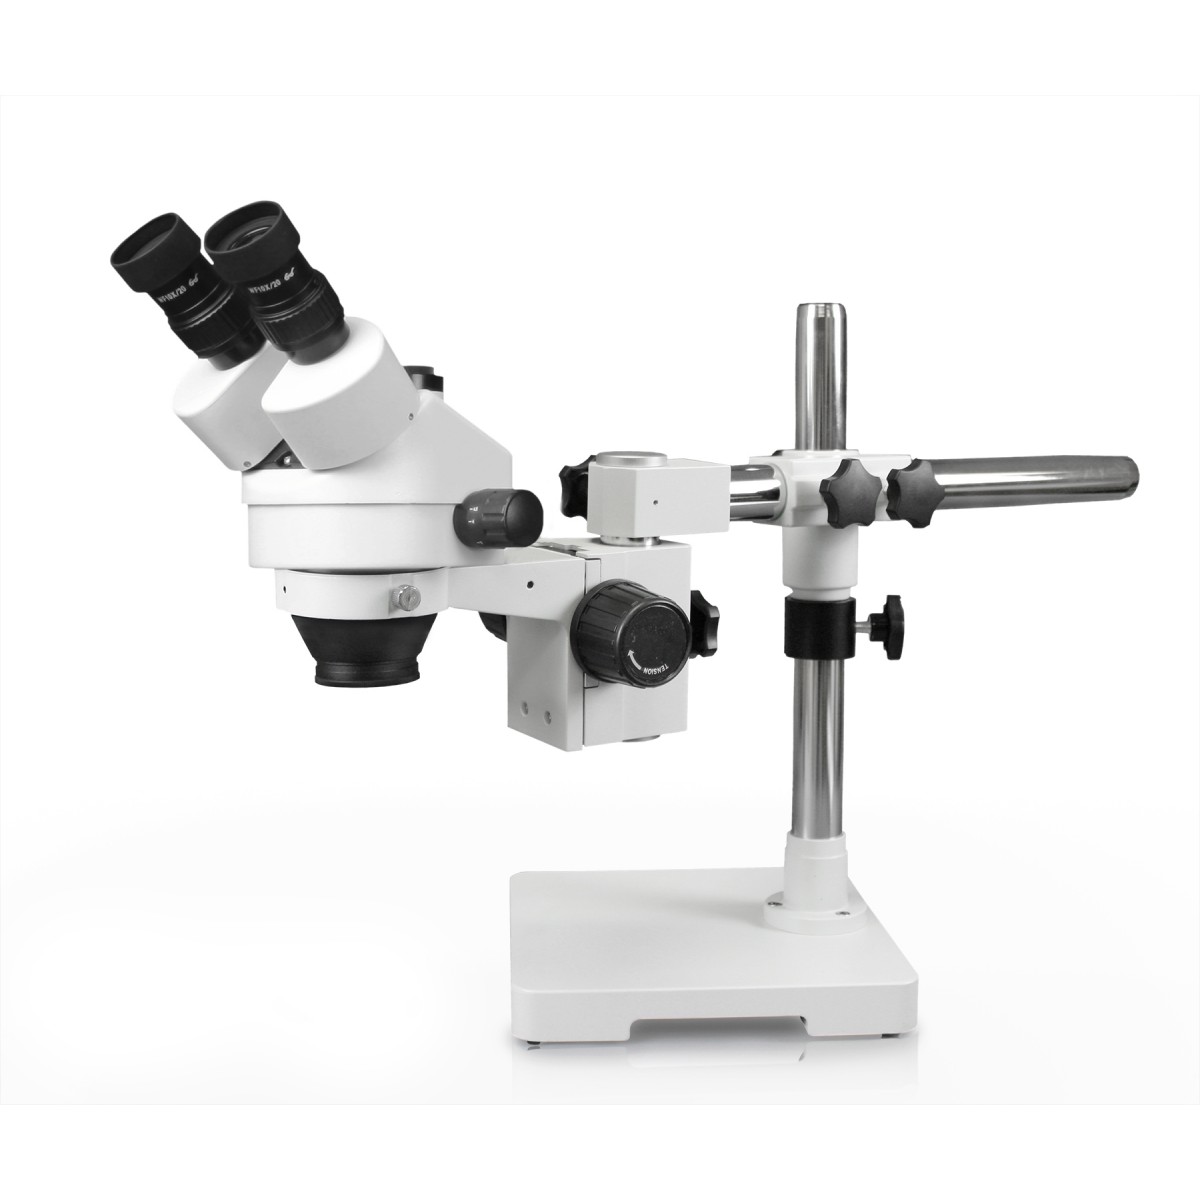 Parco Scientific Simul-Focal Trinocular Zoom Stereo Microscope,10x WF Eyepiece,0.7X-4.5X Zoom,3.5x-90x Magnification,0.5X & 2X Auxiliary Lens,Single Arm Boom Stand,144-LED 4-Zone Ring Light W/Control 